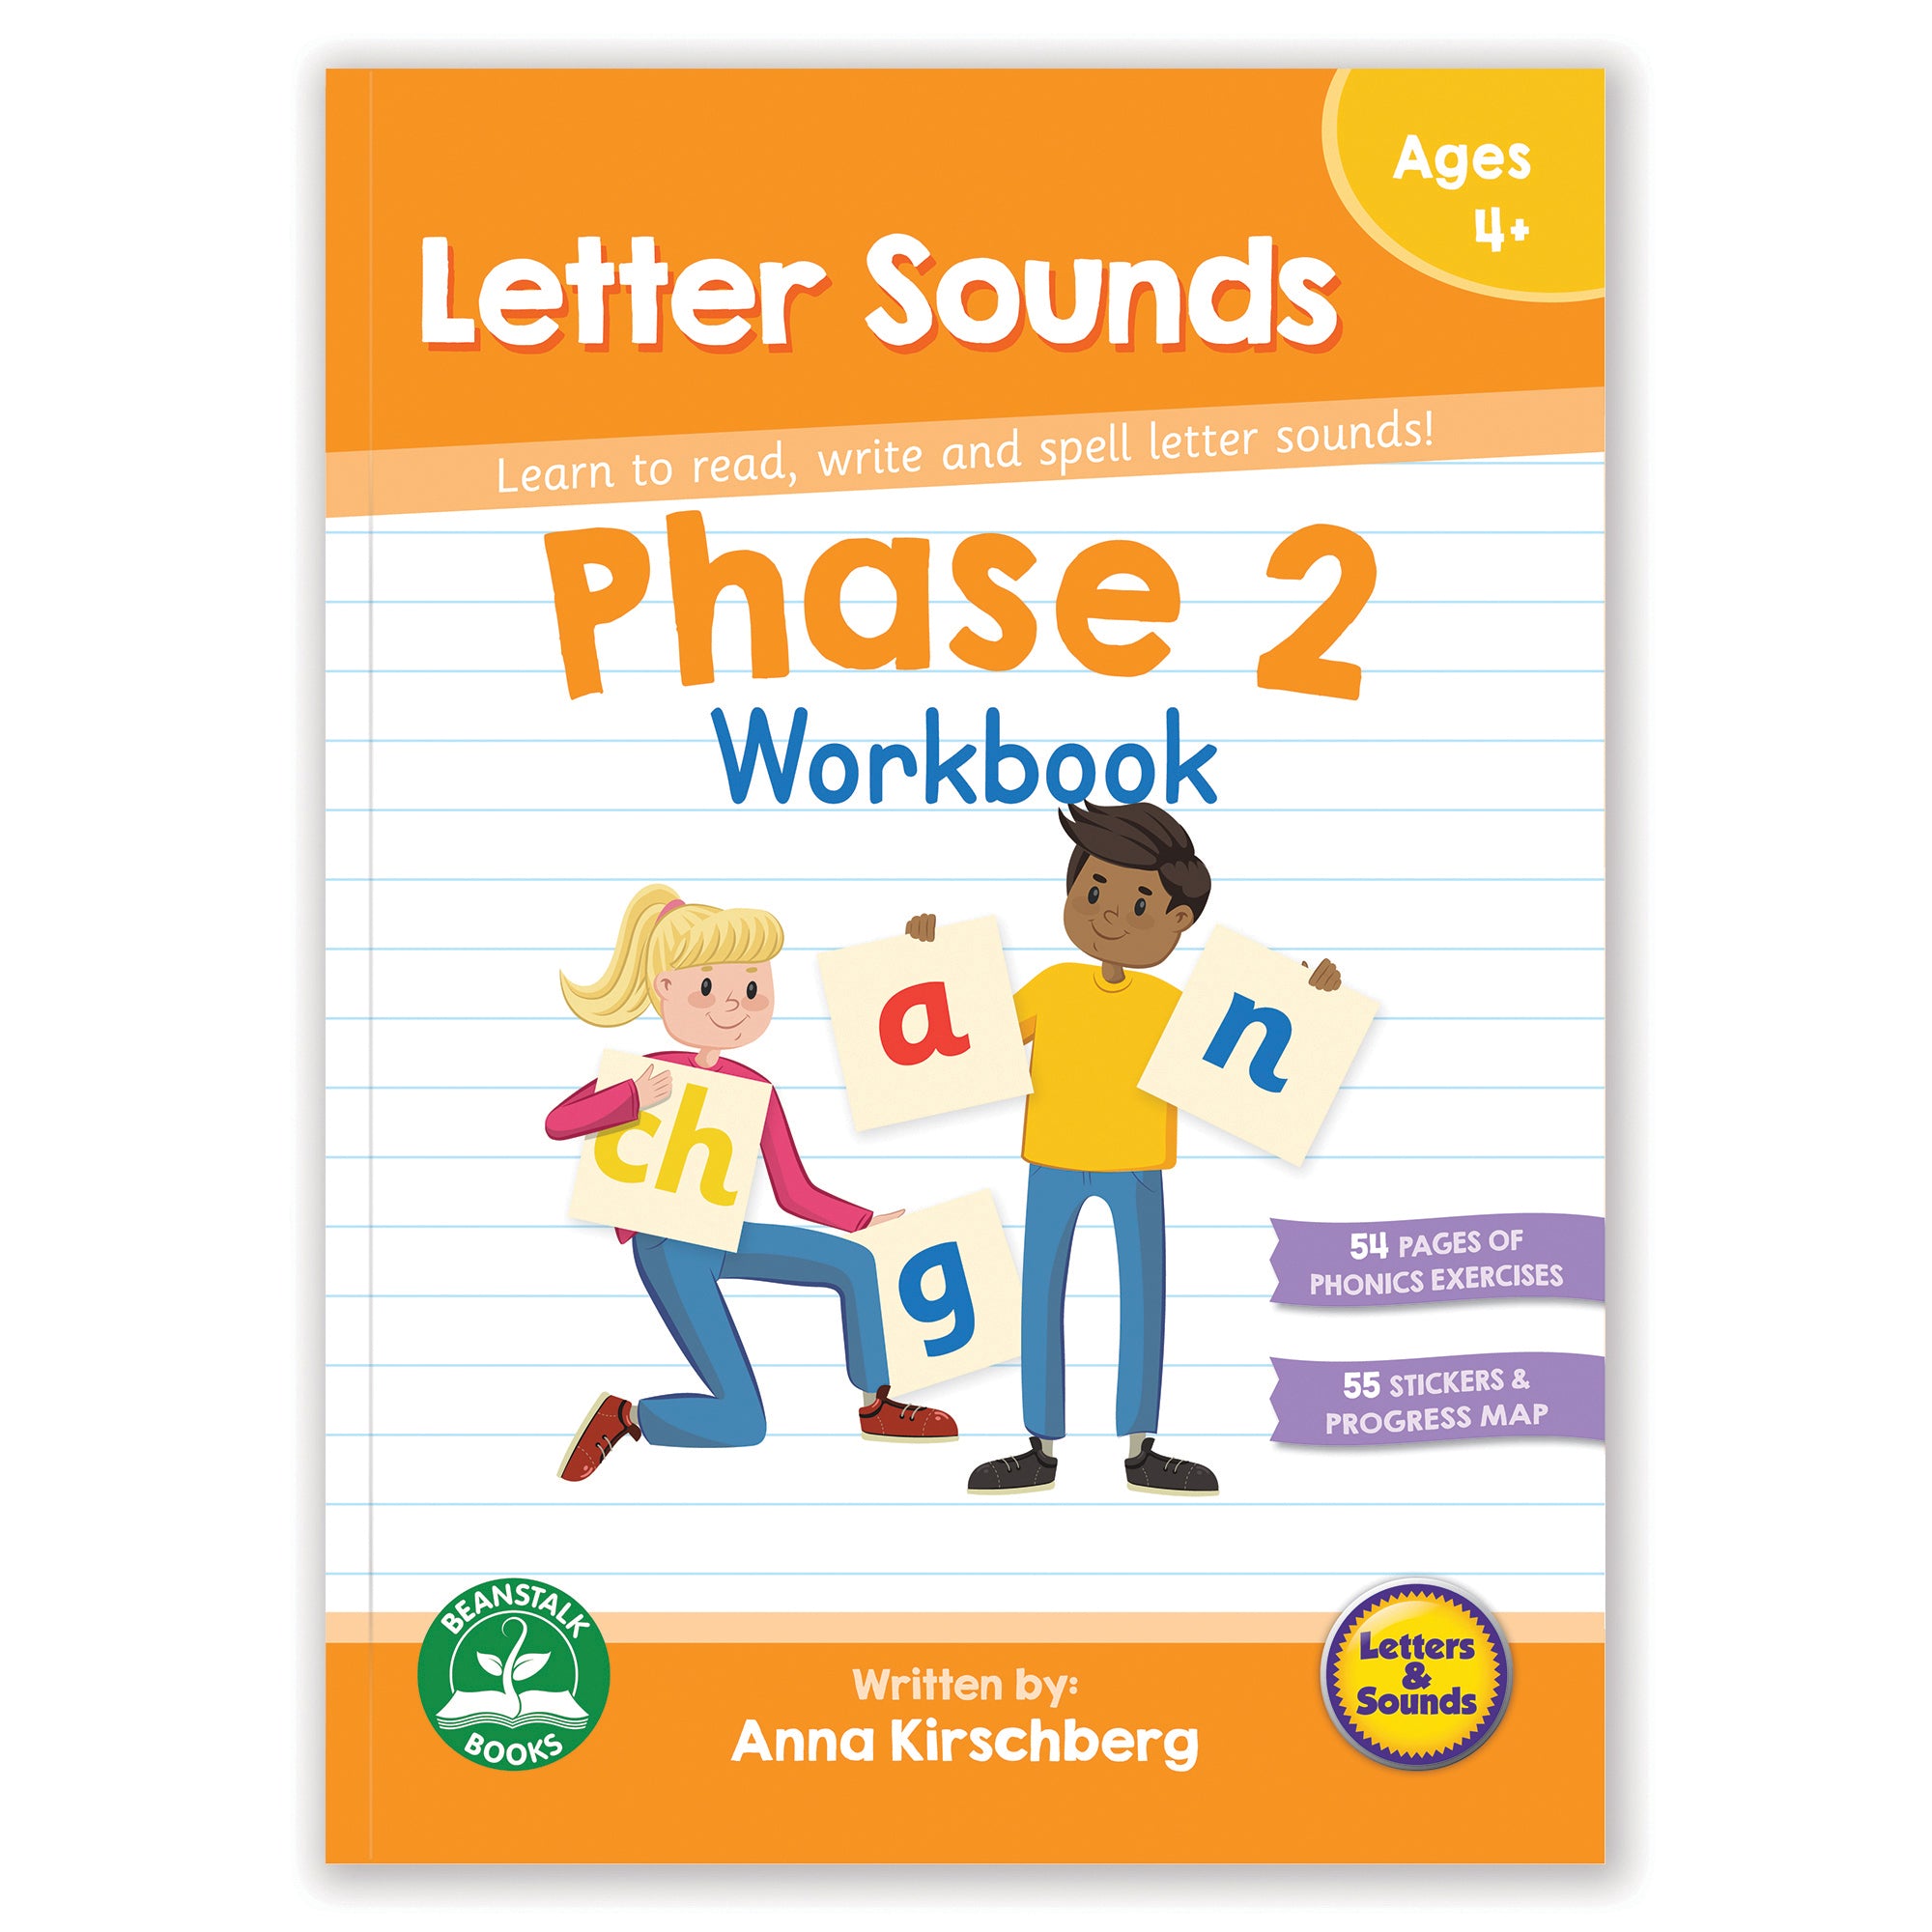 Letters and Sounds Phase 2 Letter Sounds Classroom Kit